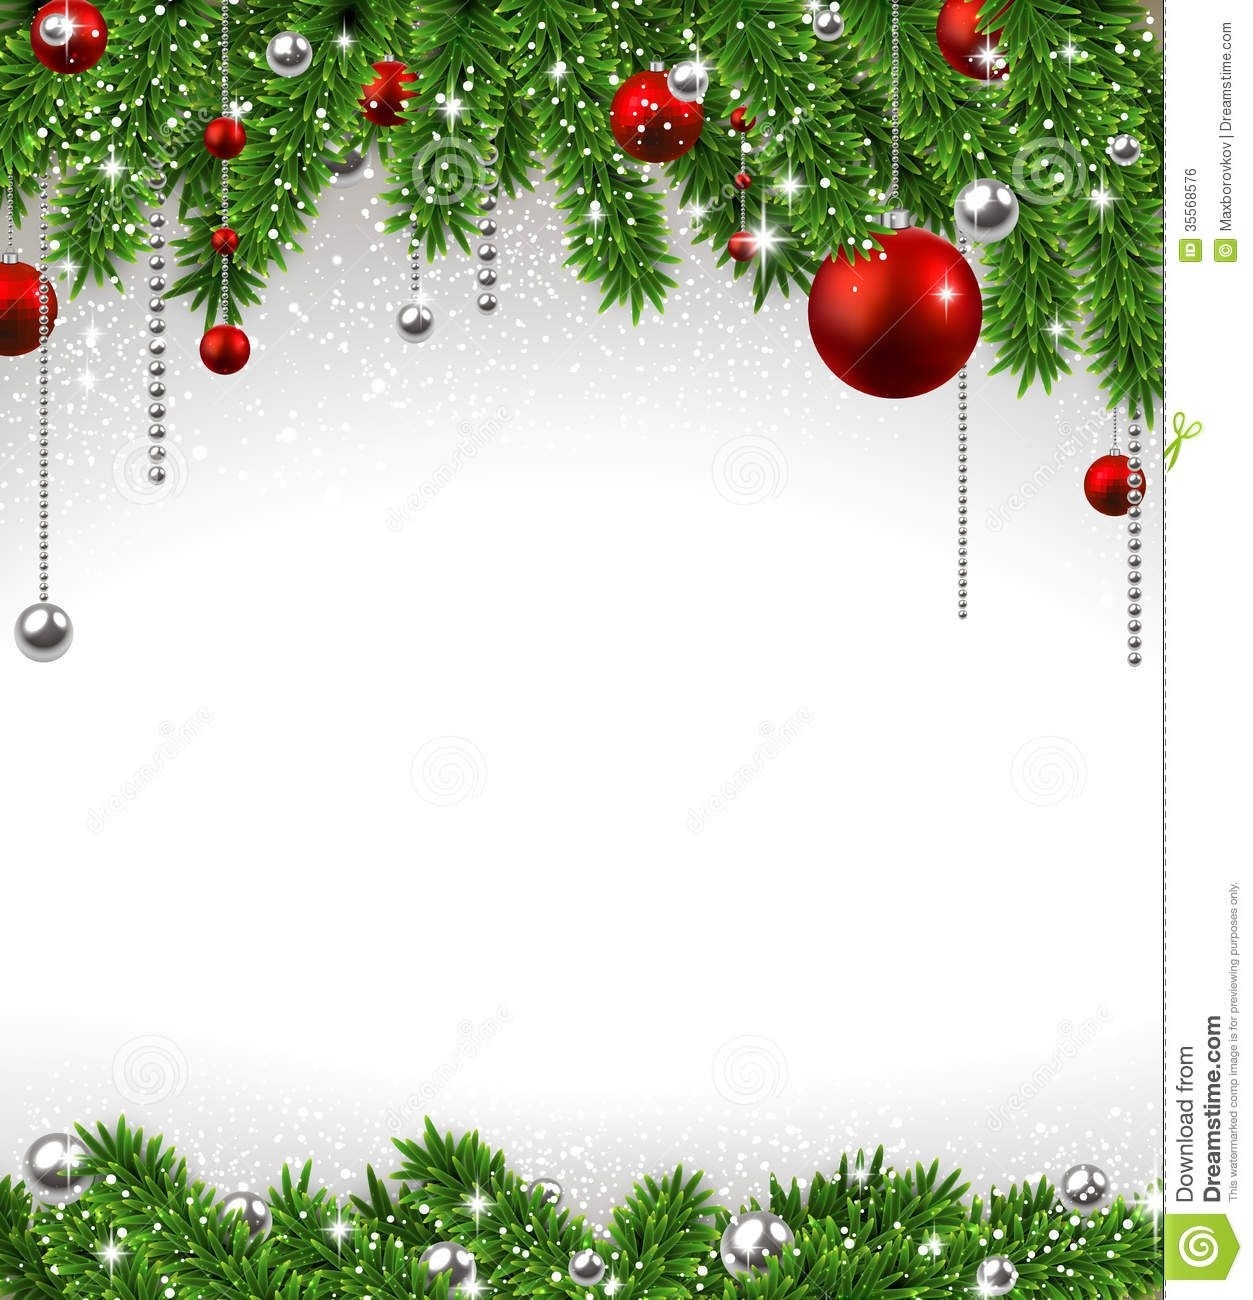 10 Best Free Christmas Background Pictures FULL HD 1920×1080 For PC Desktop